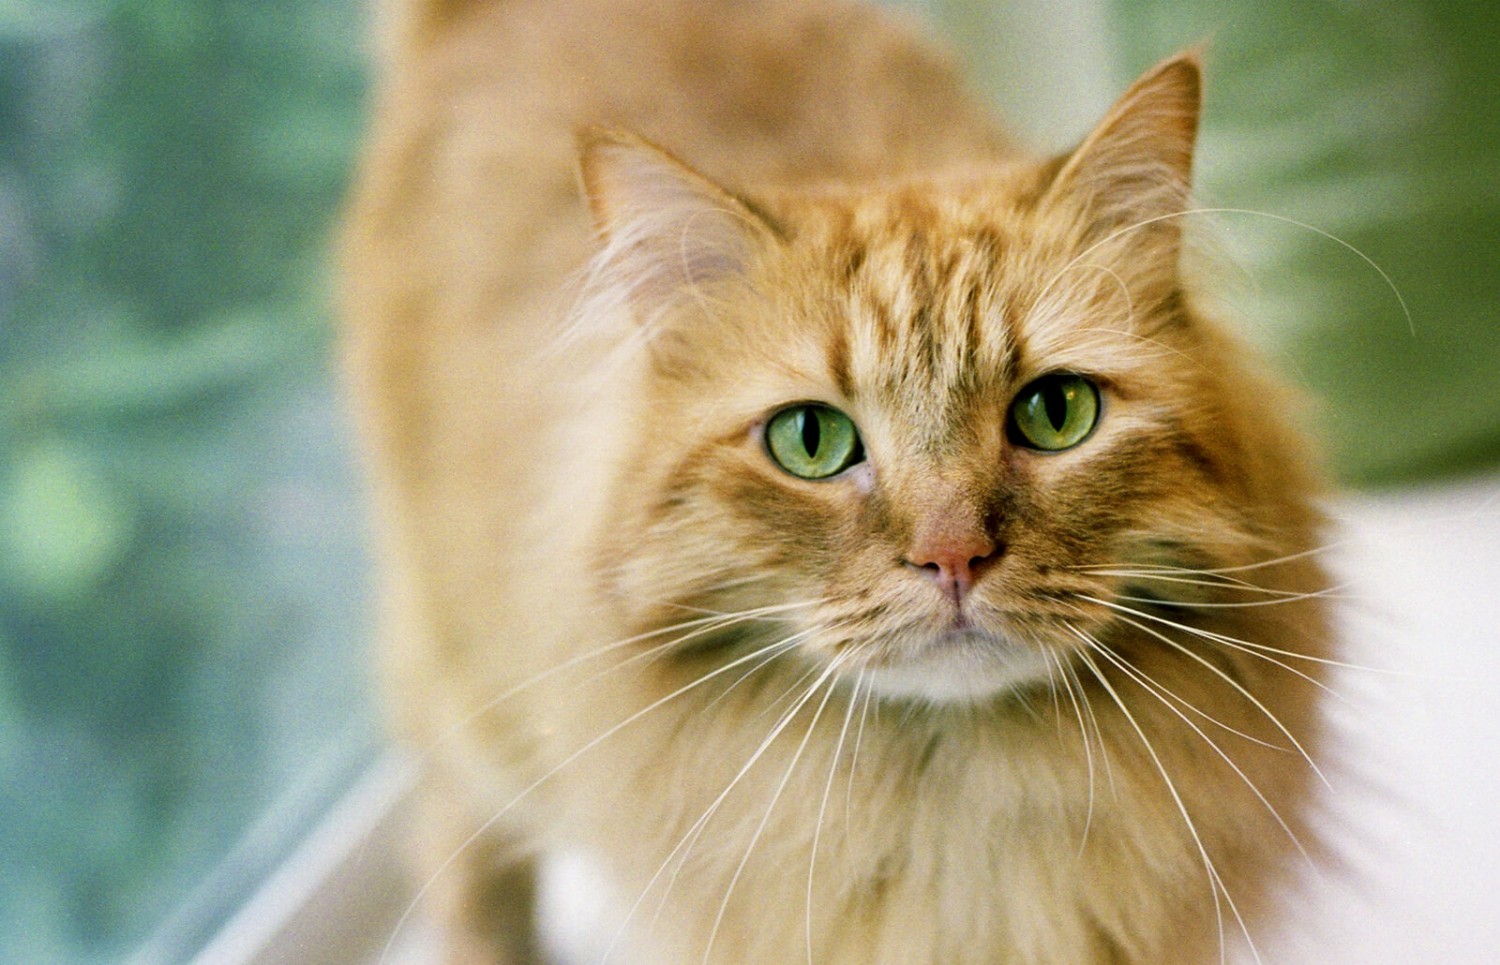 most orange tabby cats male